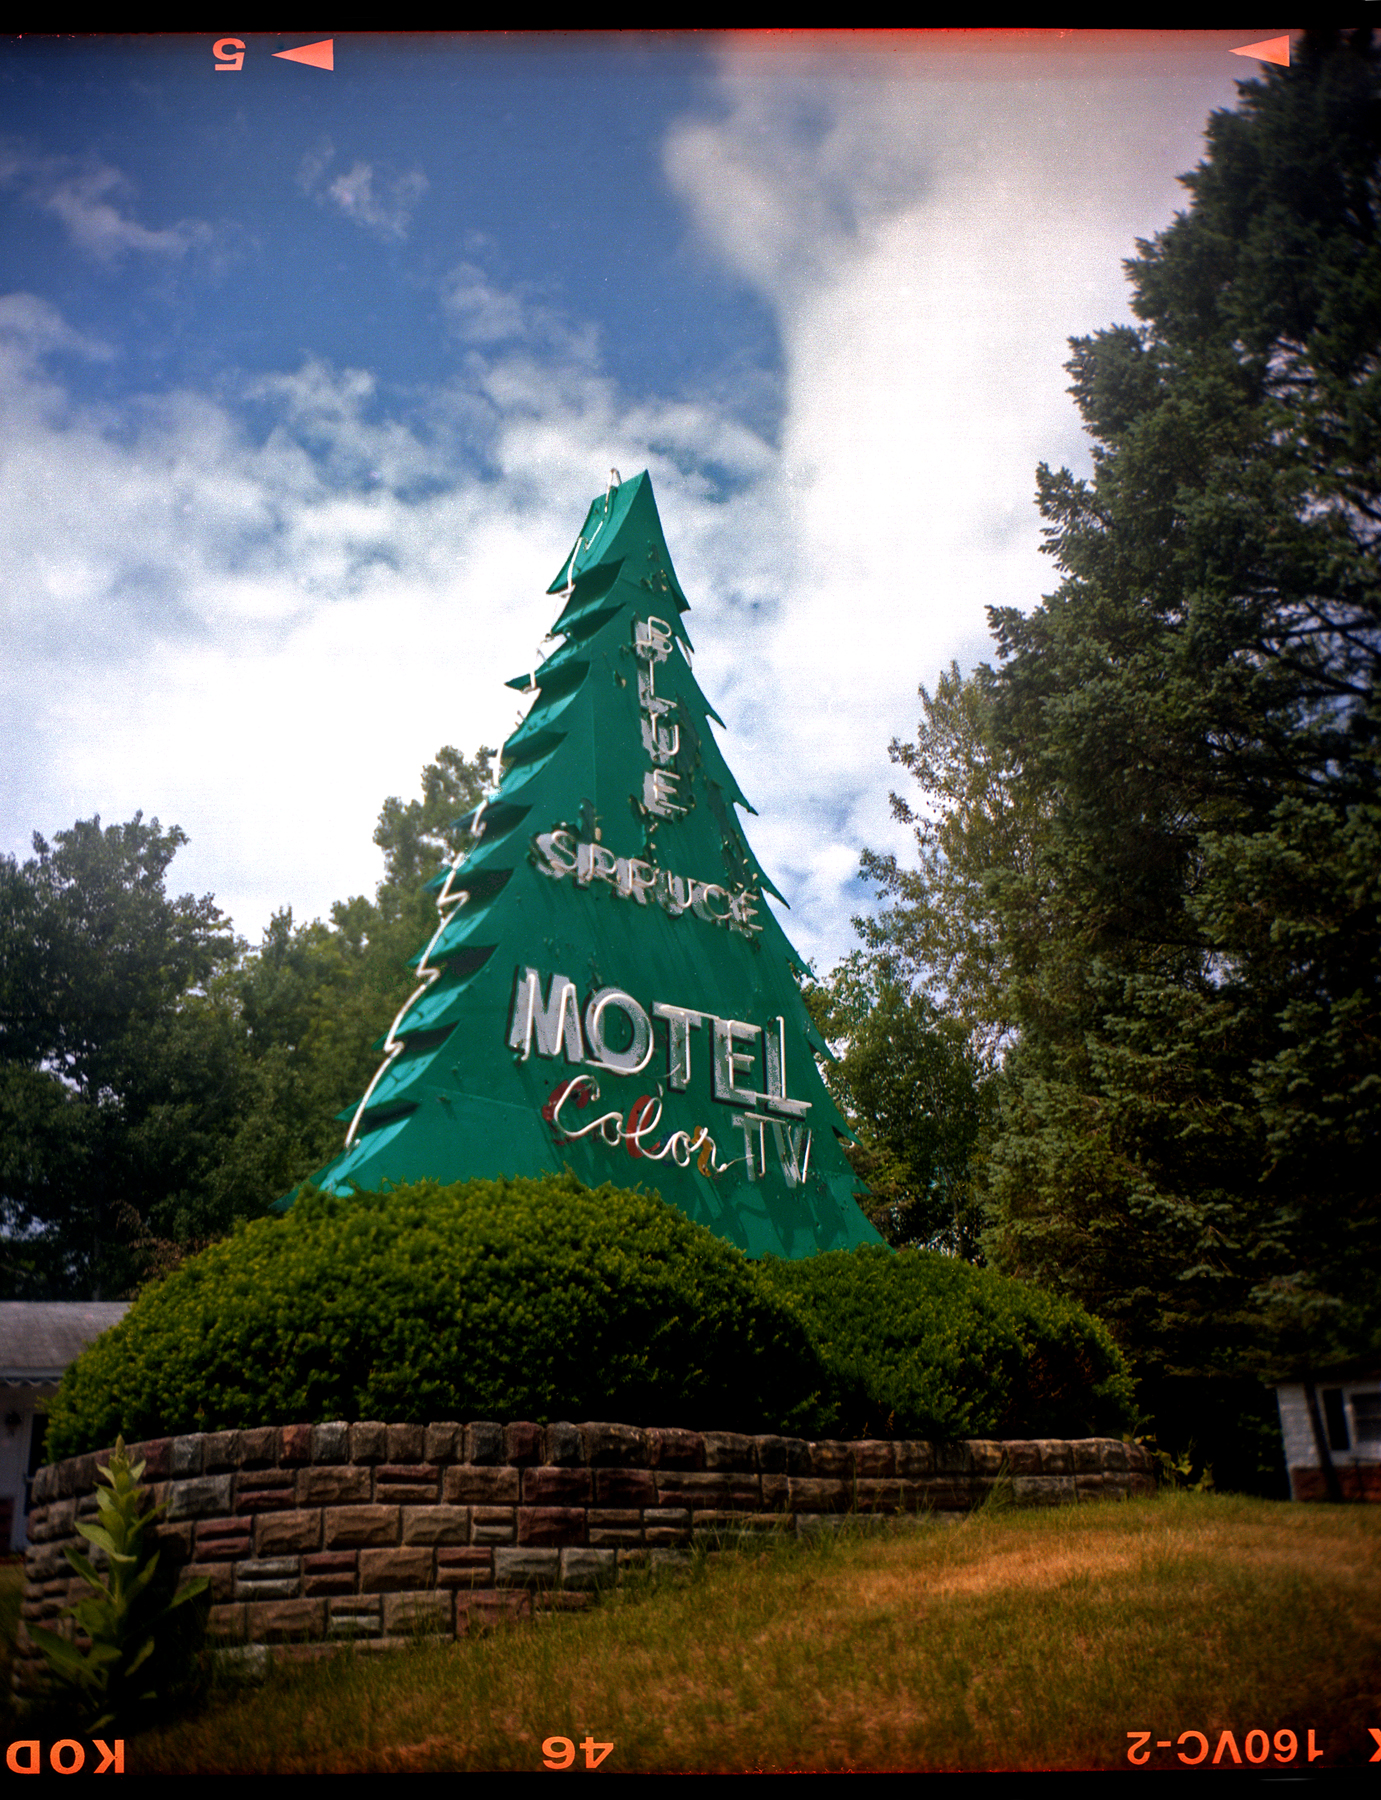 Motel sign as a tree